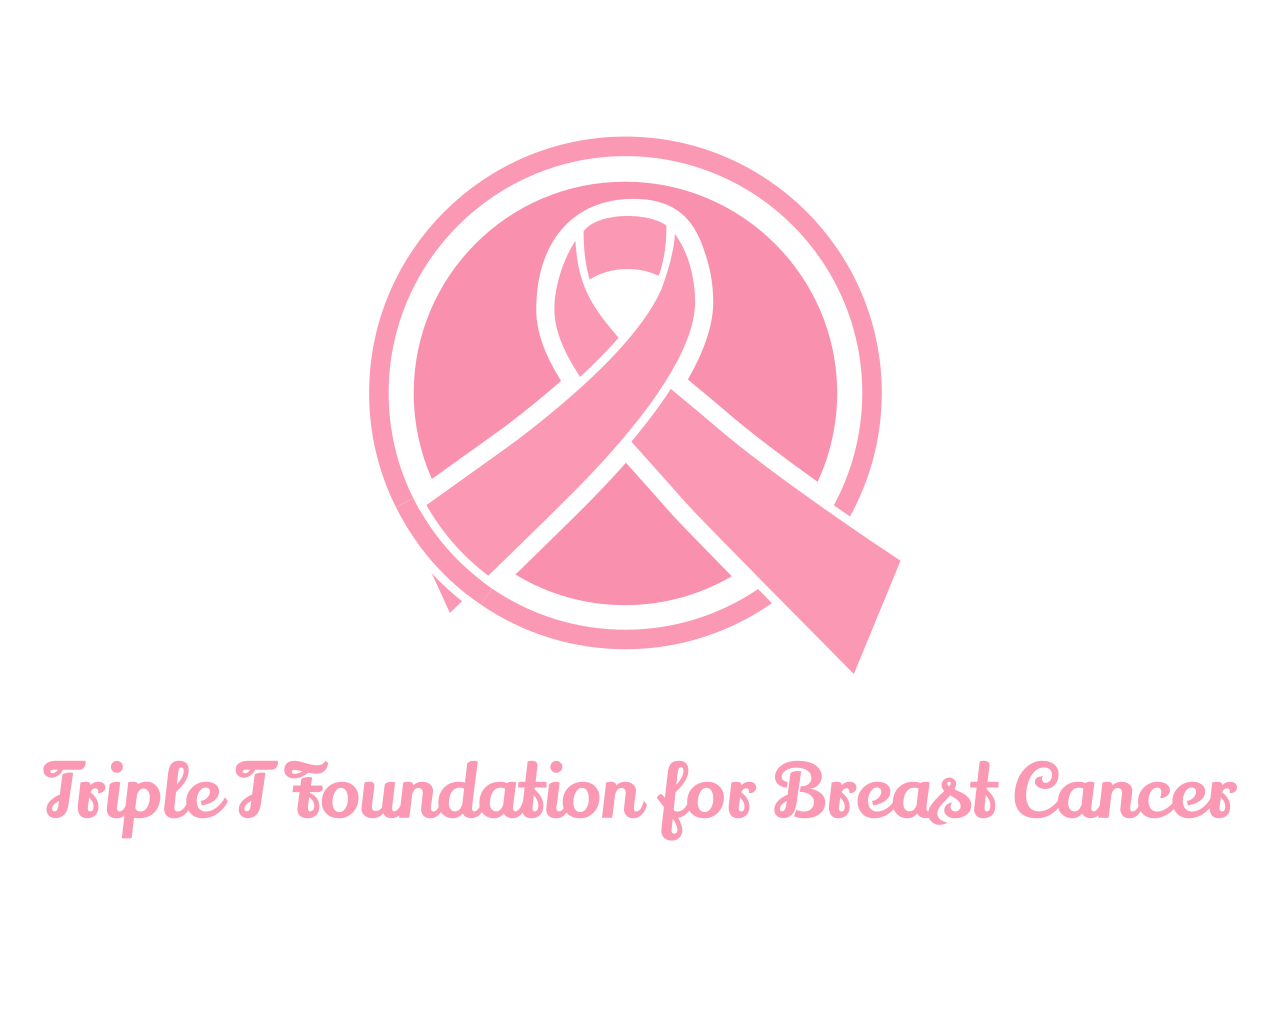 Triple T Foundation for Breast Cancer